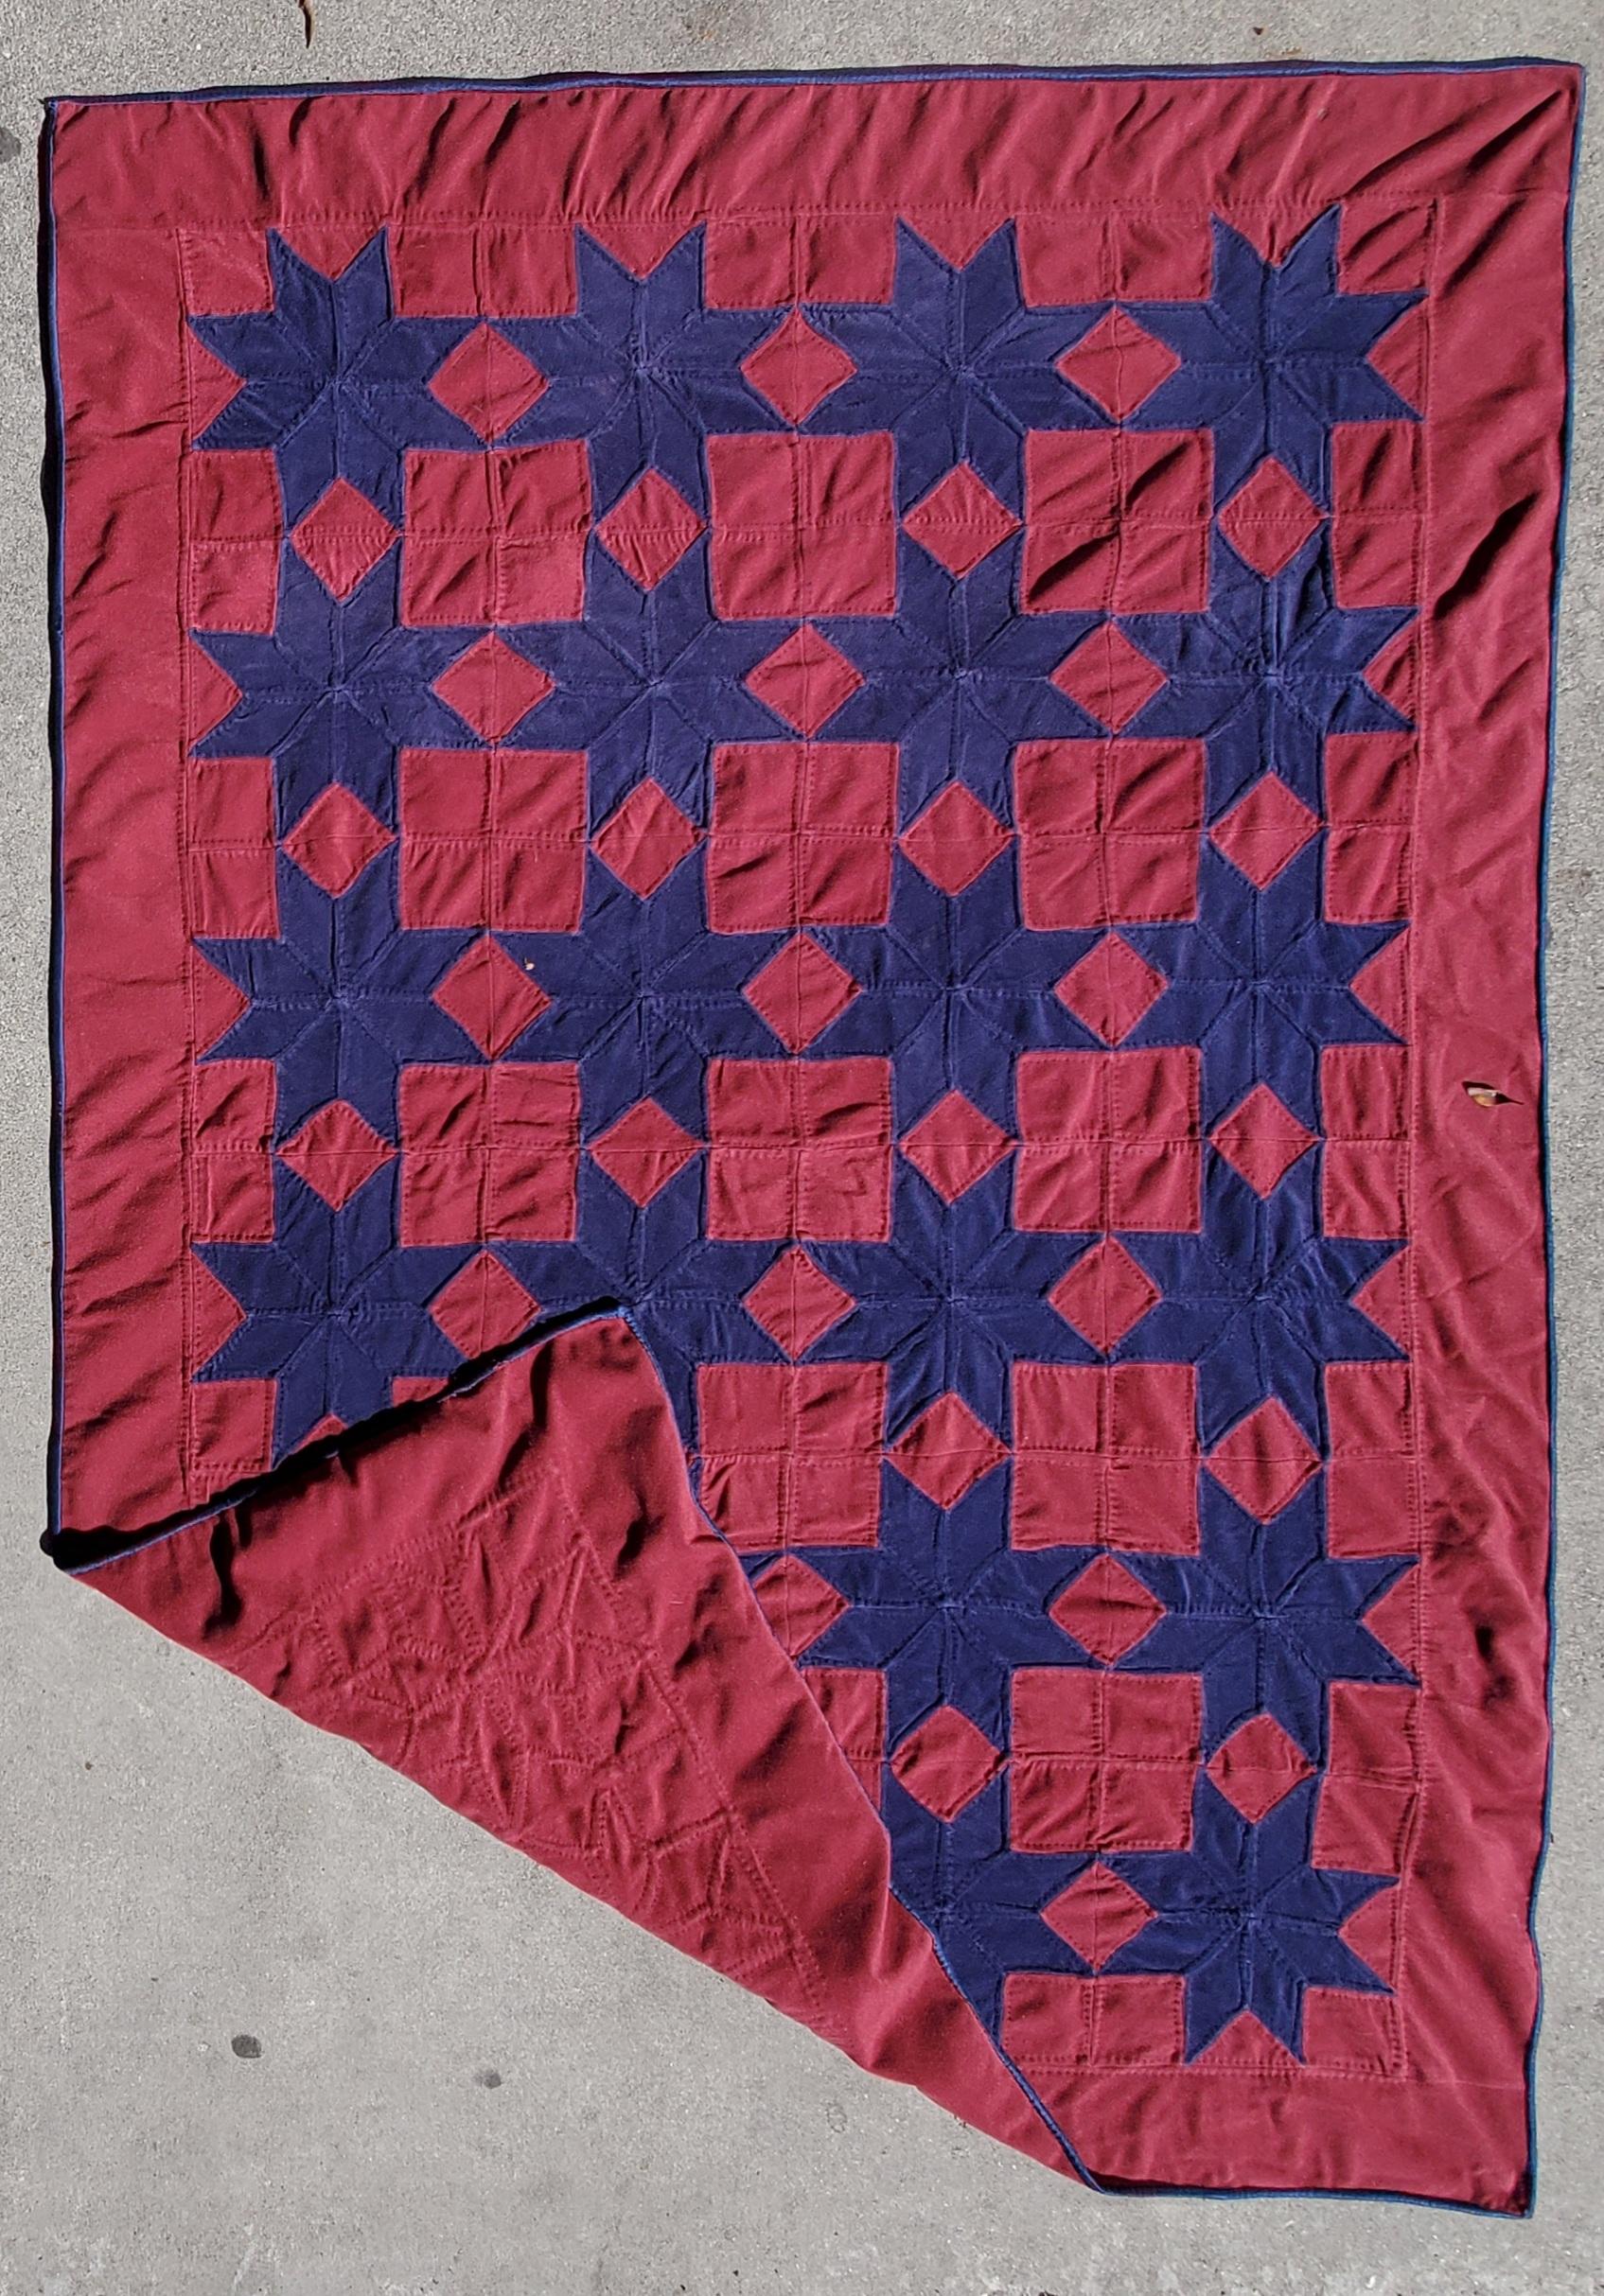 This fine red & blue velvet quilt with touching stars is in amazing unused condition.The quilting and piece work is very good.